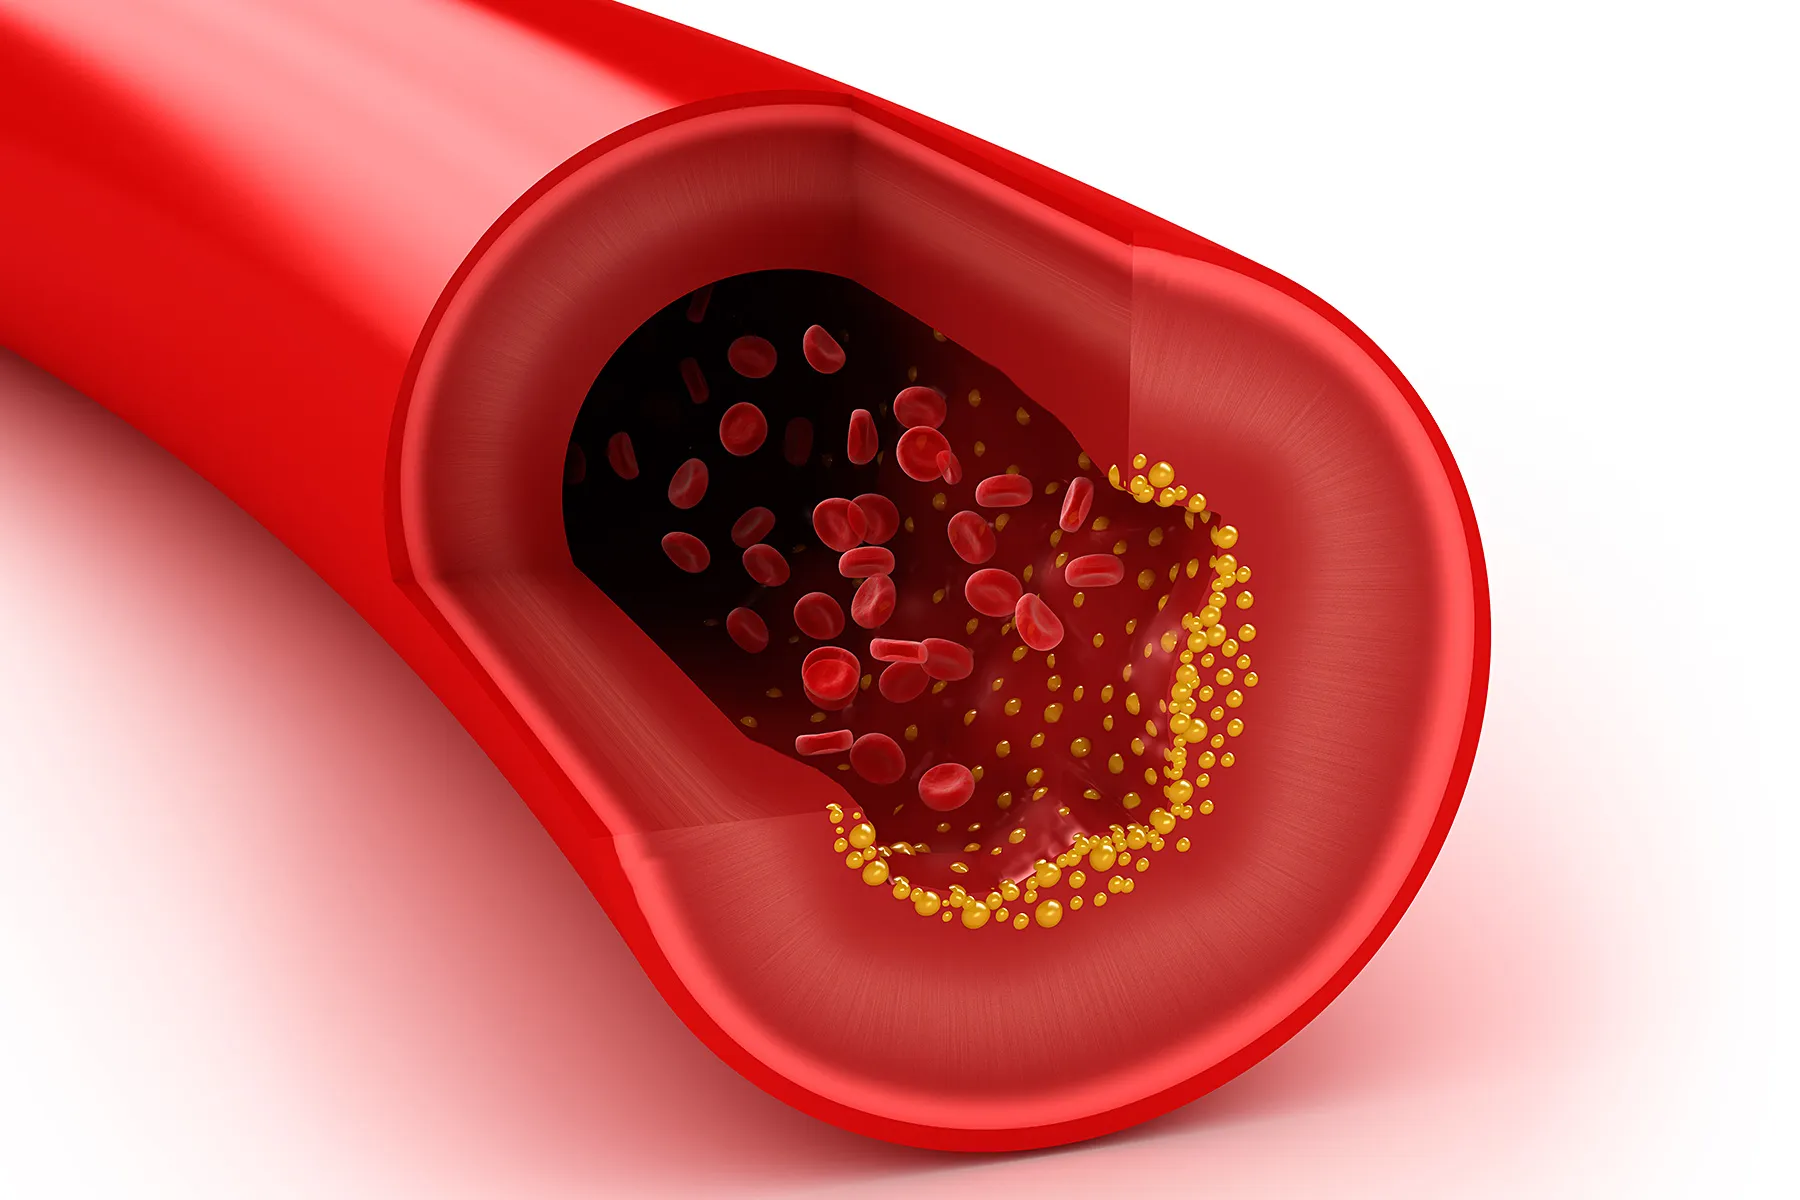 cholesterol plaque in artery wall